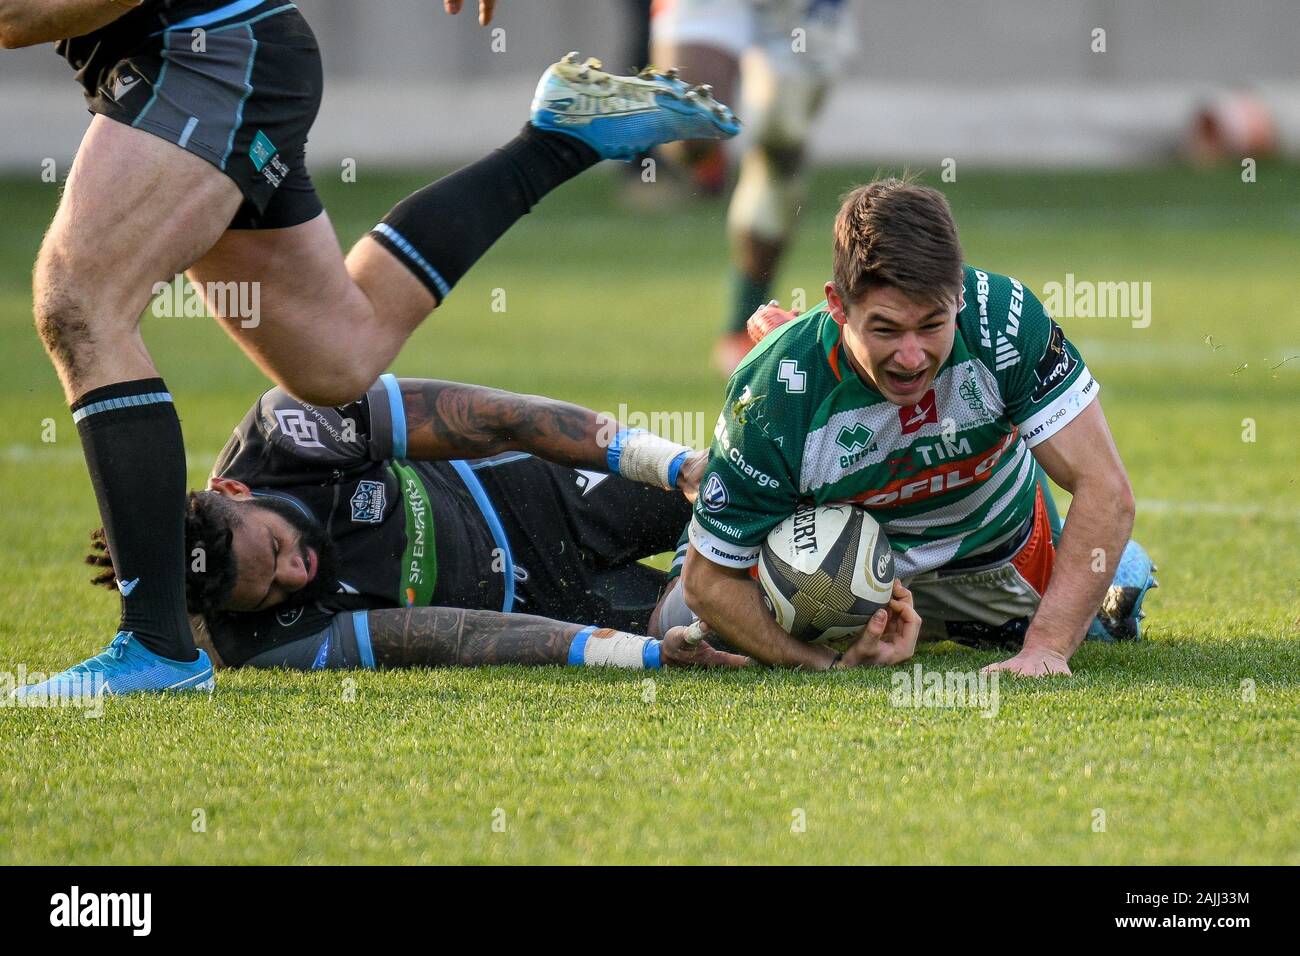 Treviso, Italy, 04 Jan 2020, happiness of antonio rizzi (treviso) per latry  during Benetton Treviso vs Glasgow Warriors - Rugby Guinness Pro 14 -  Credit: LPS/Ettore Griffoni/Alamy Live News Credit: Agenzia Fotografica